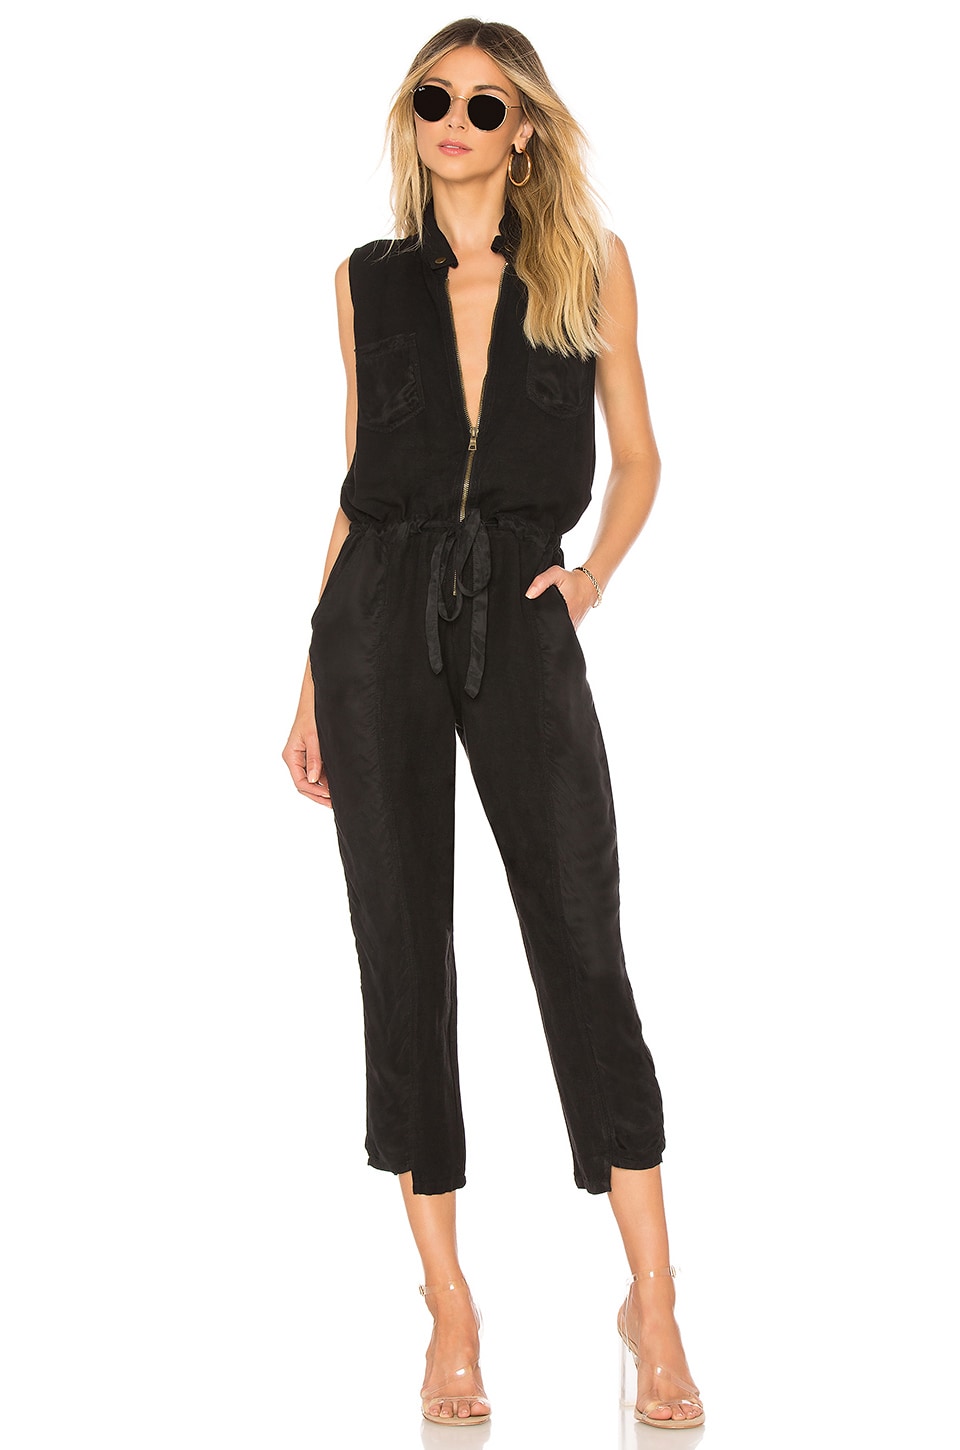 Yfb Clothing Linette Jumpsuit In Black Revolve